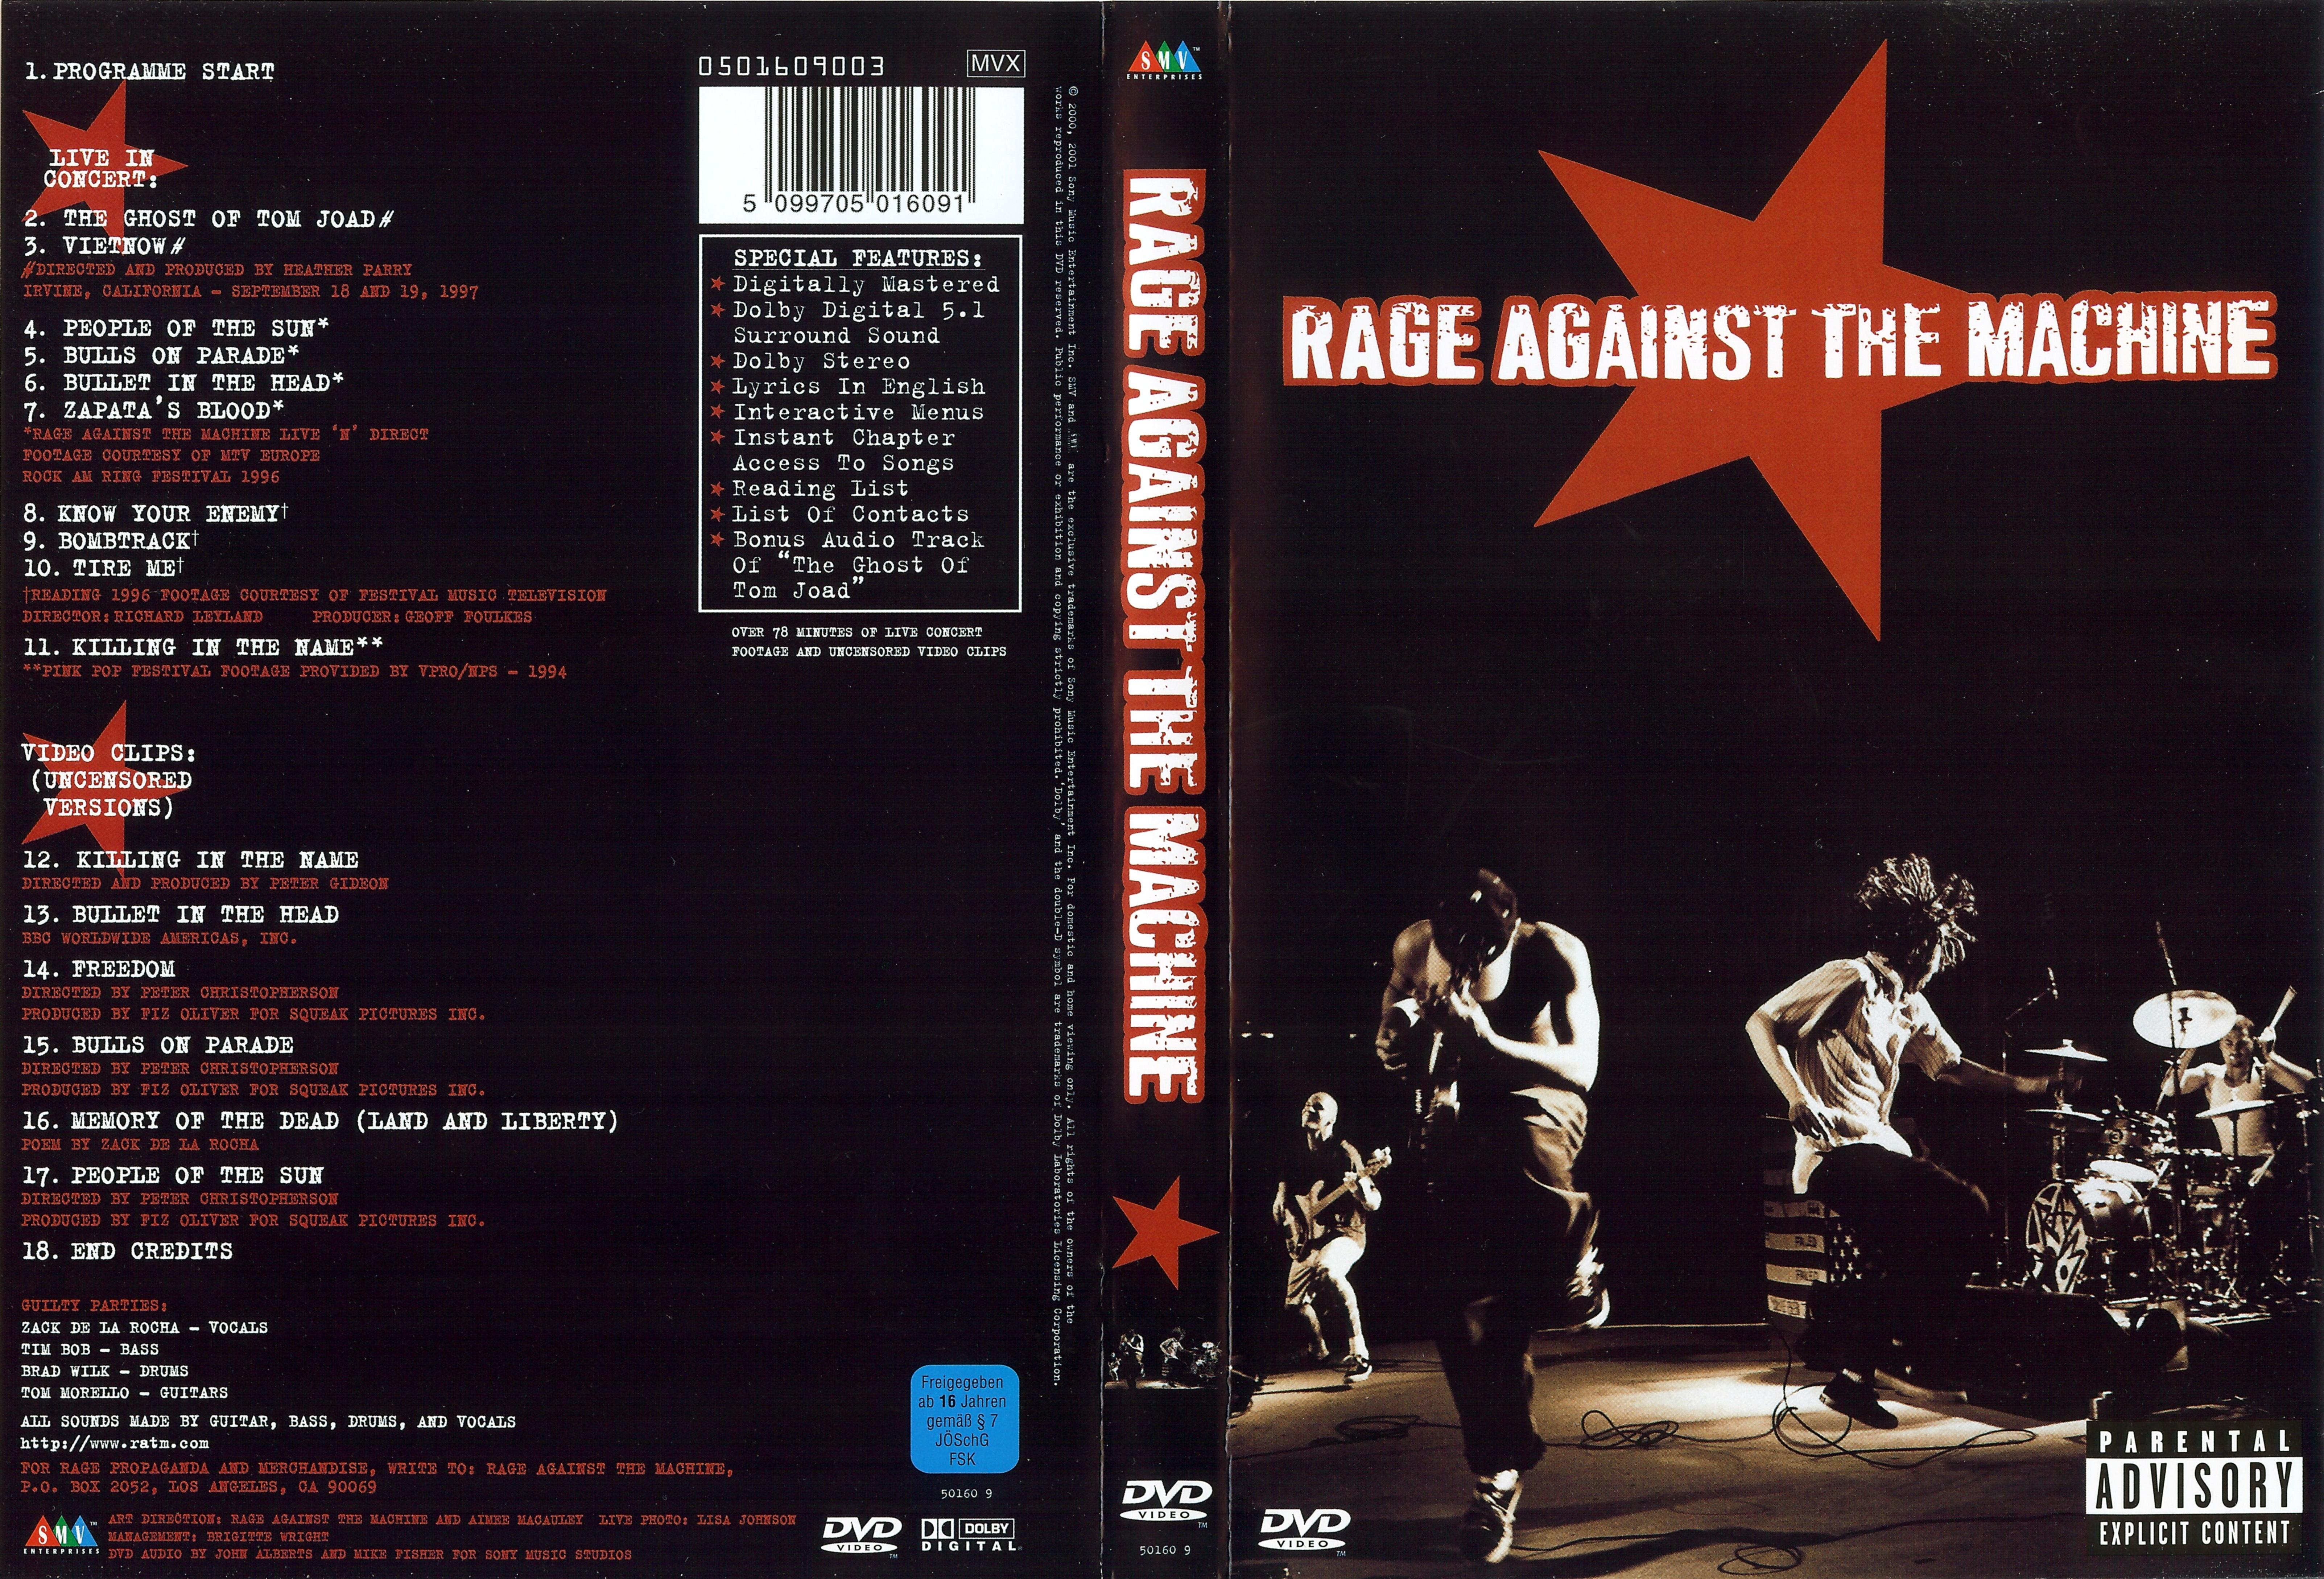 Jaquette DVD Rage against the machine